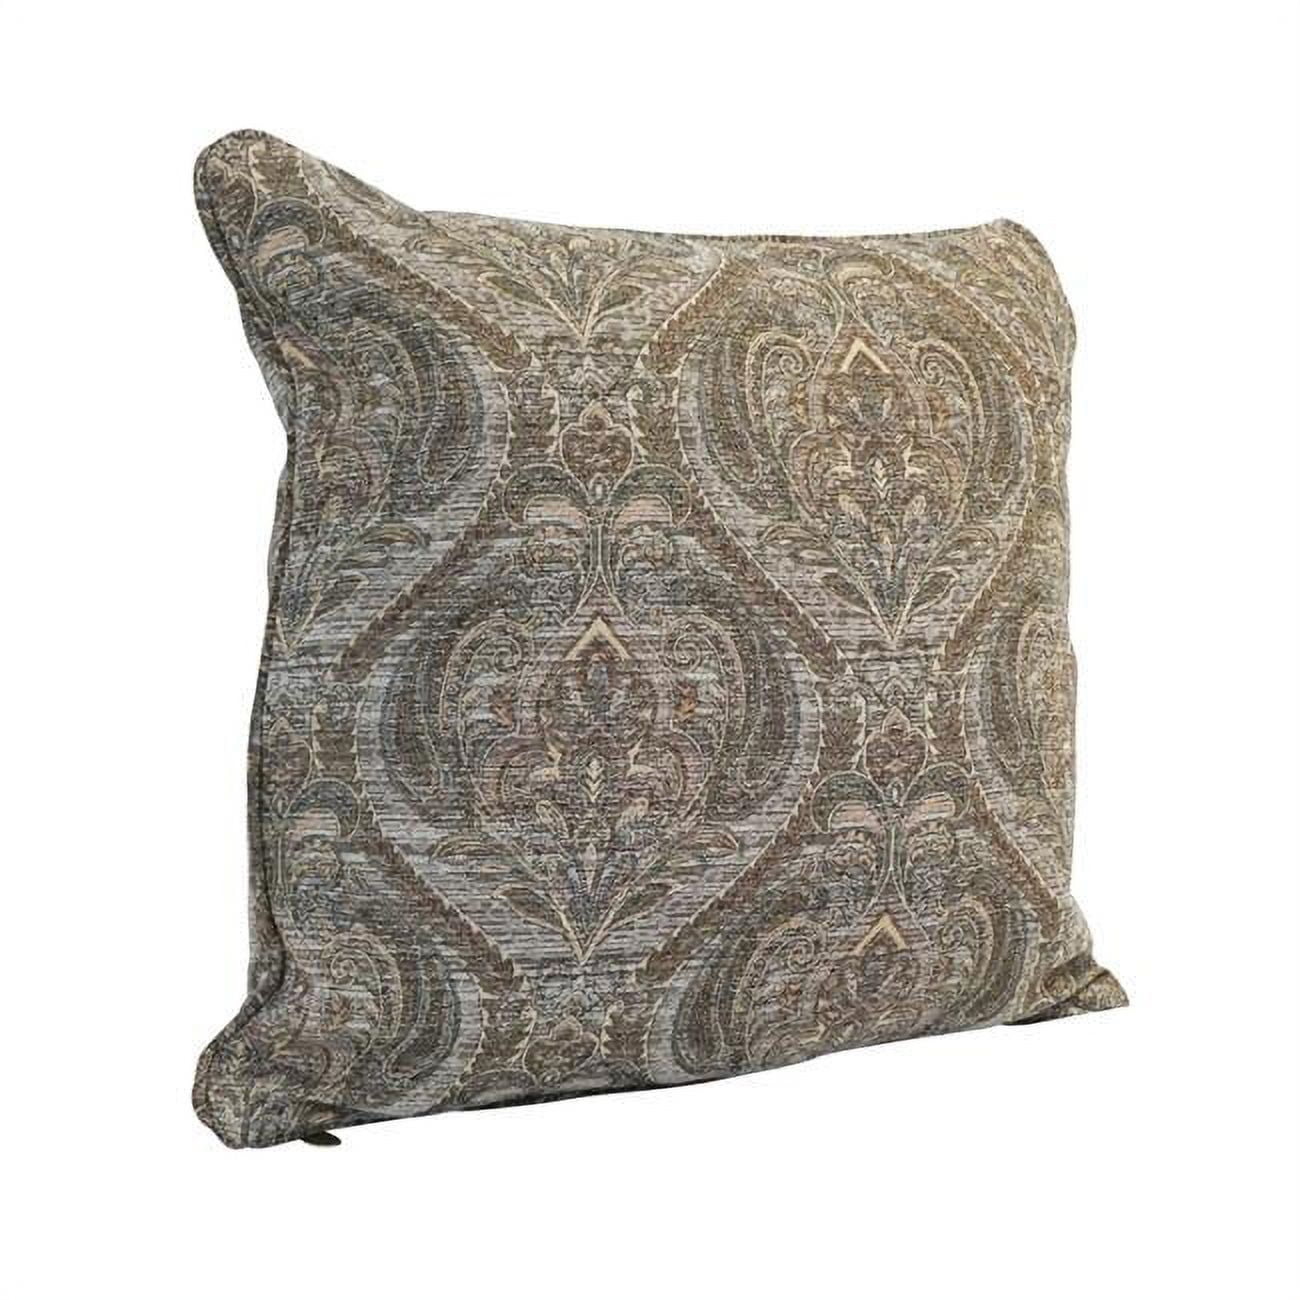 Picture of Blazing Needles 9813-CD-S1-JCH-CO-40 25 in. Double-Corded Patterned Tapestry Square Indoor Floor Pillow with Insert, Grey Damask